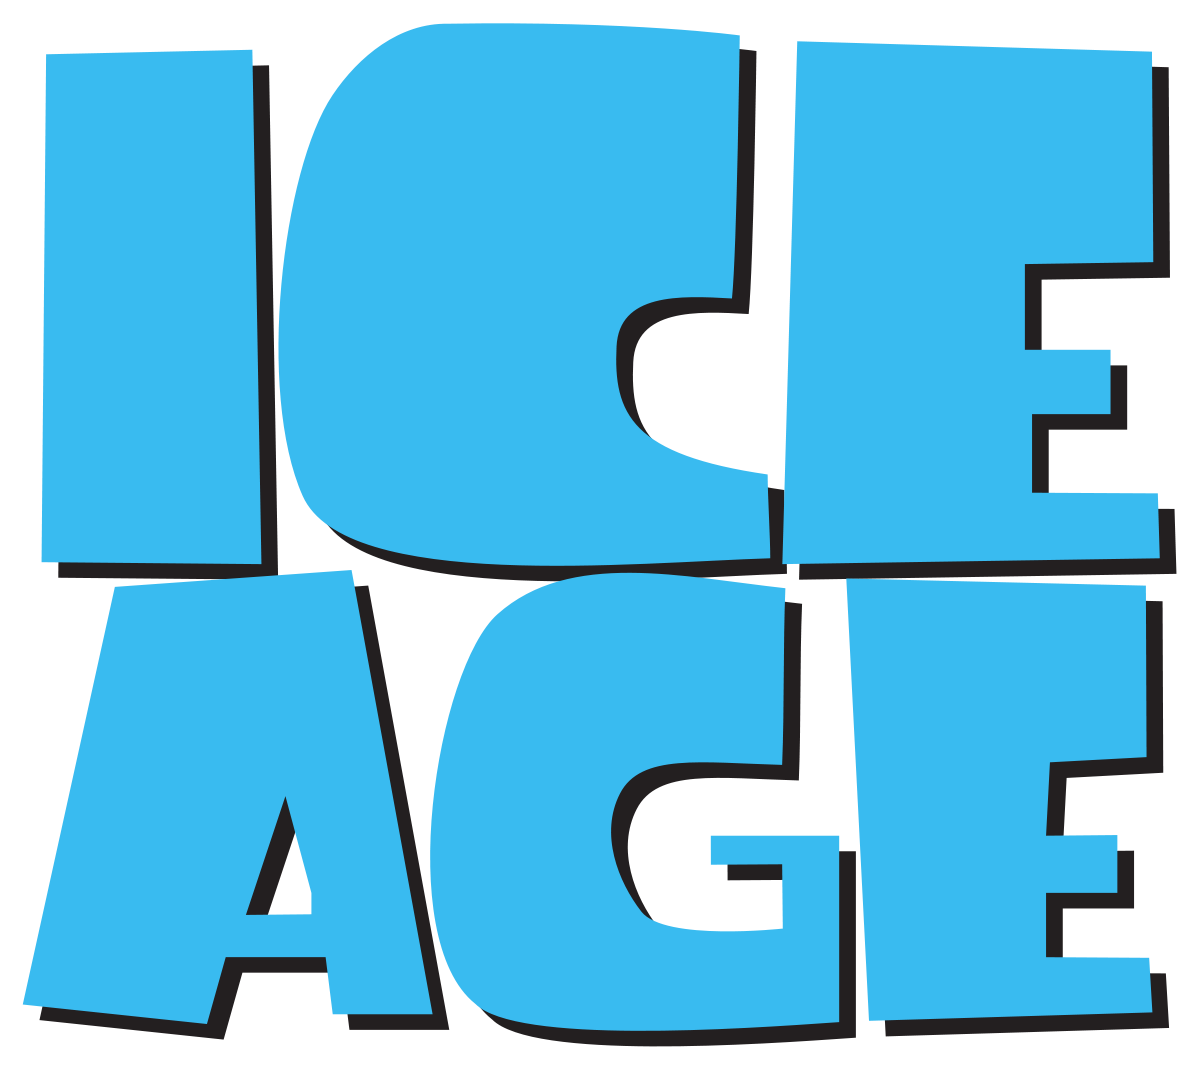 watch ice age 3 online for free full movie